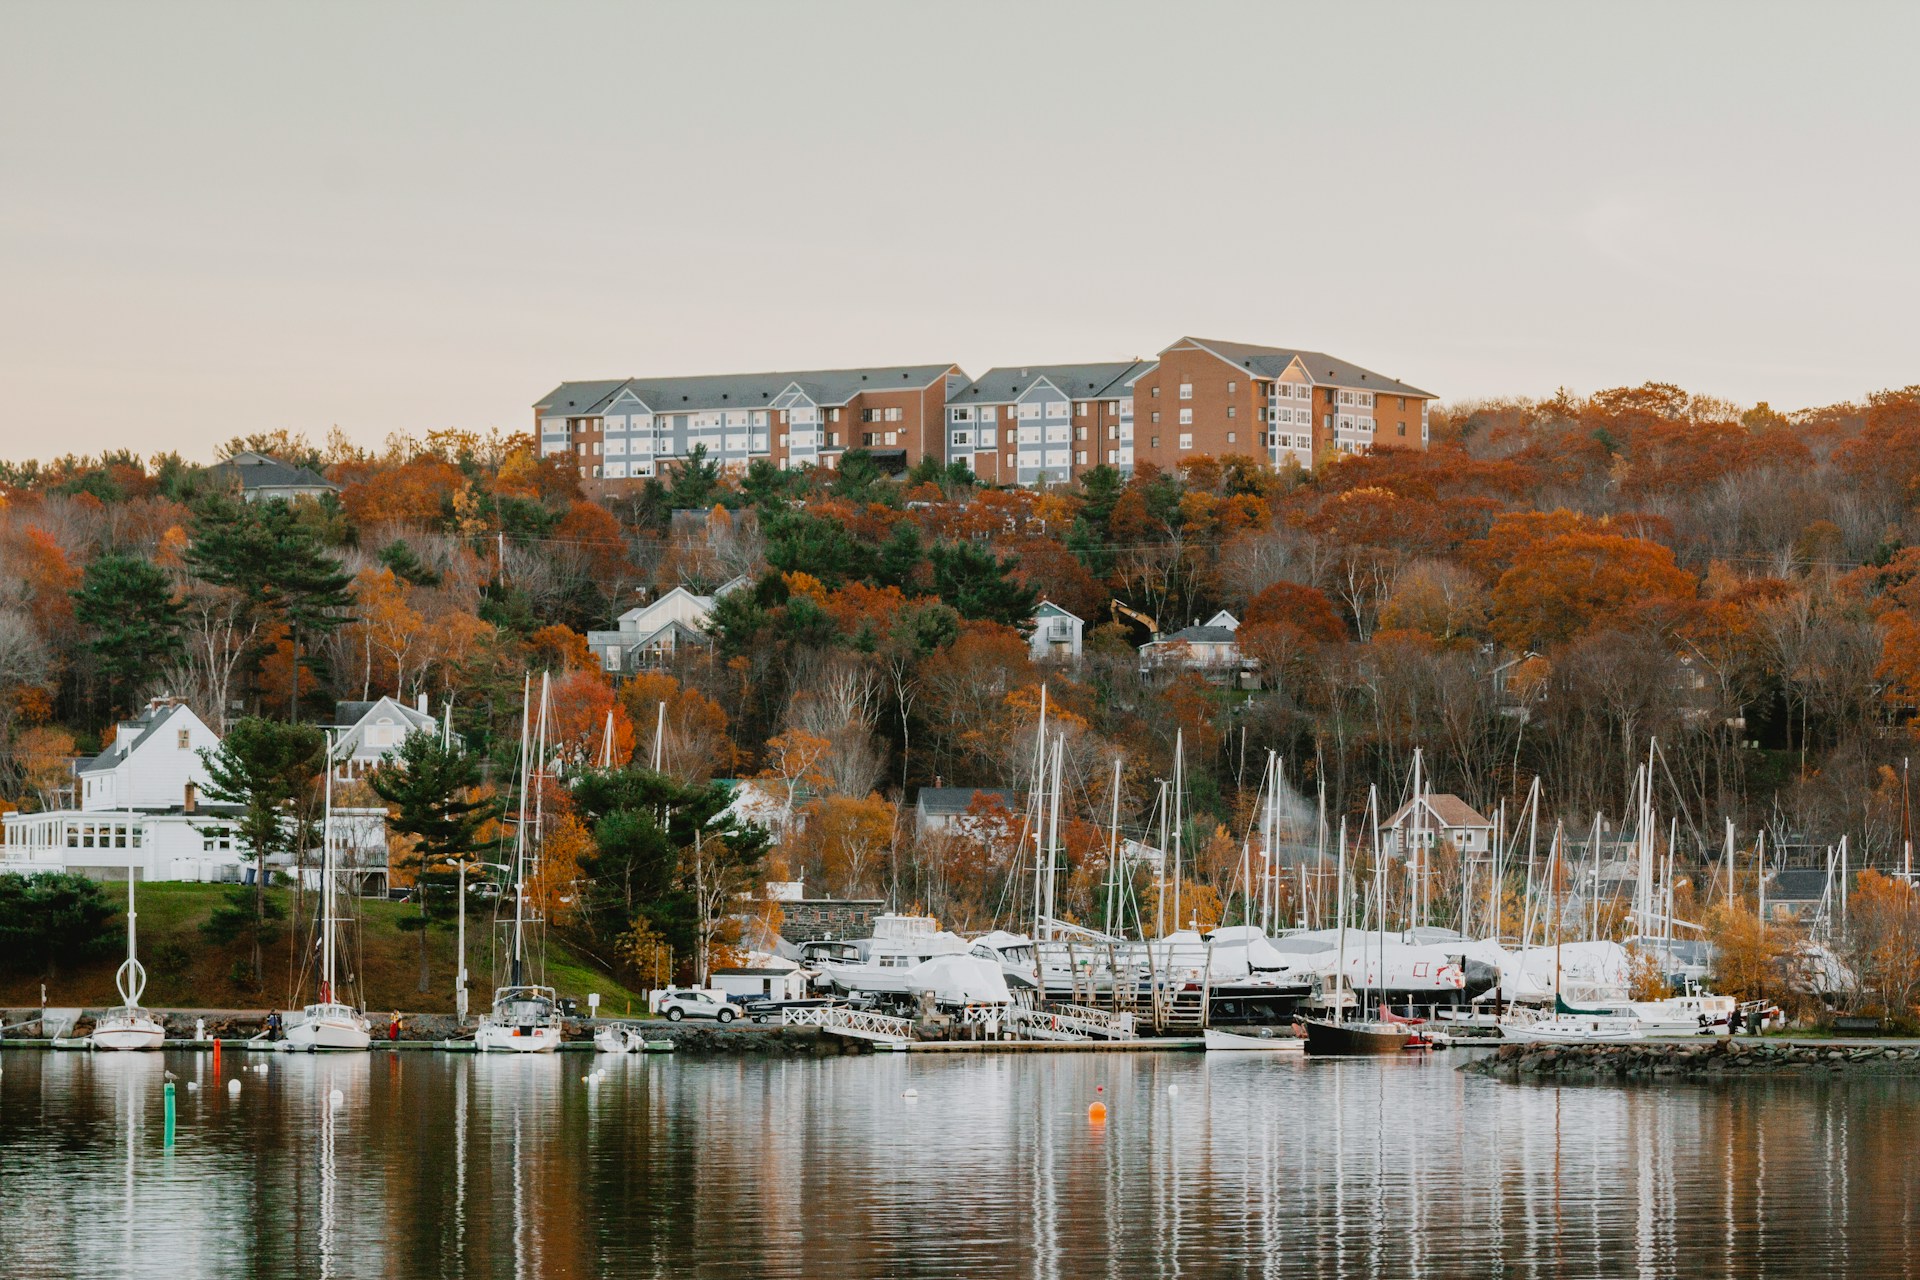 Views of boats on the water and leaves changing colors in Halifax, Nova Scotia